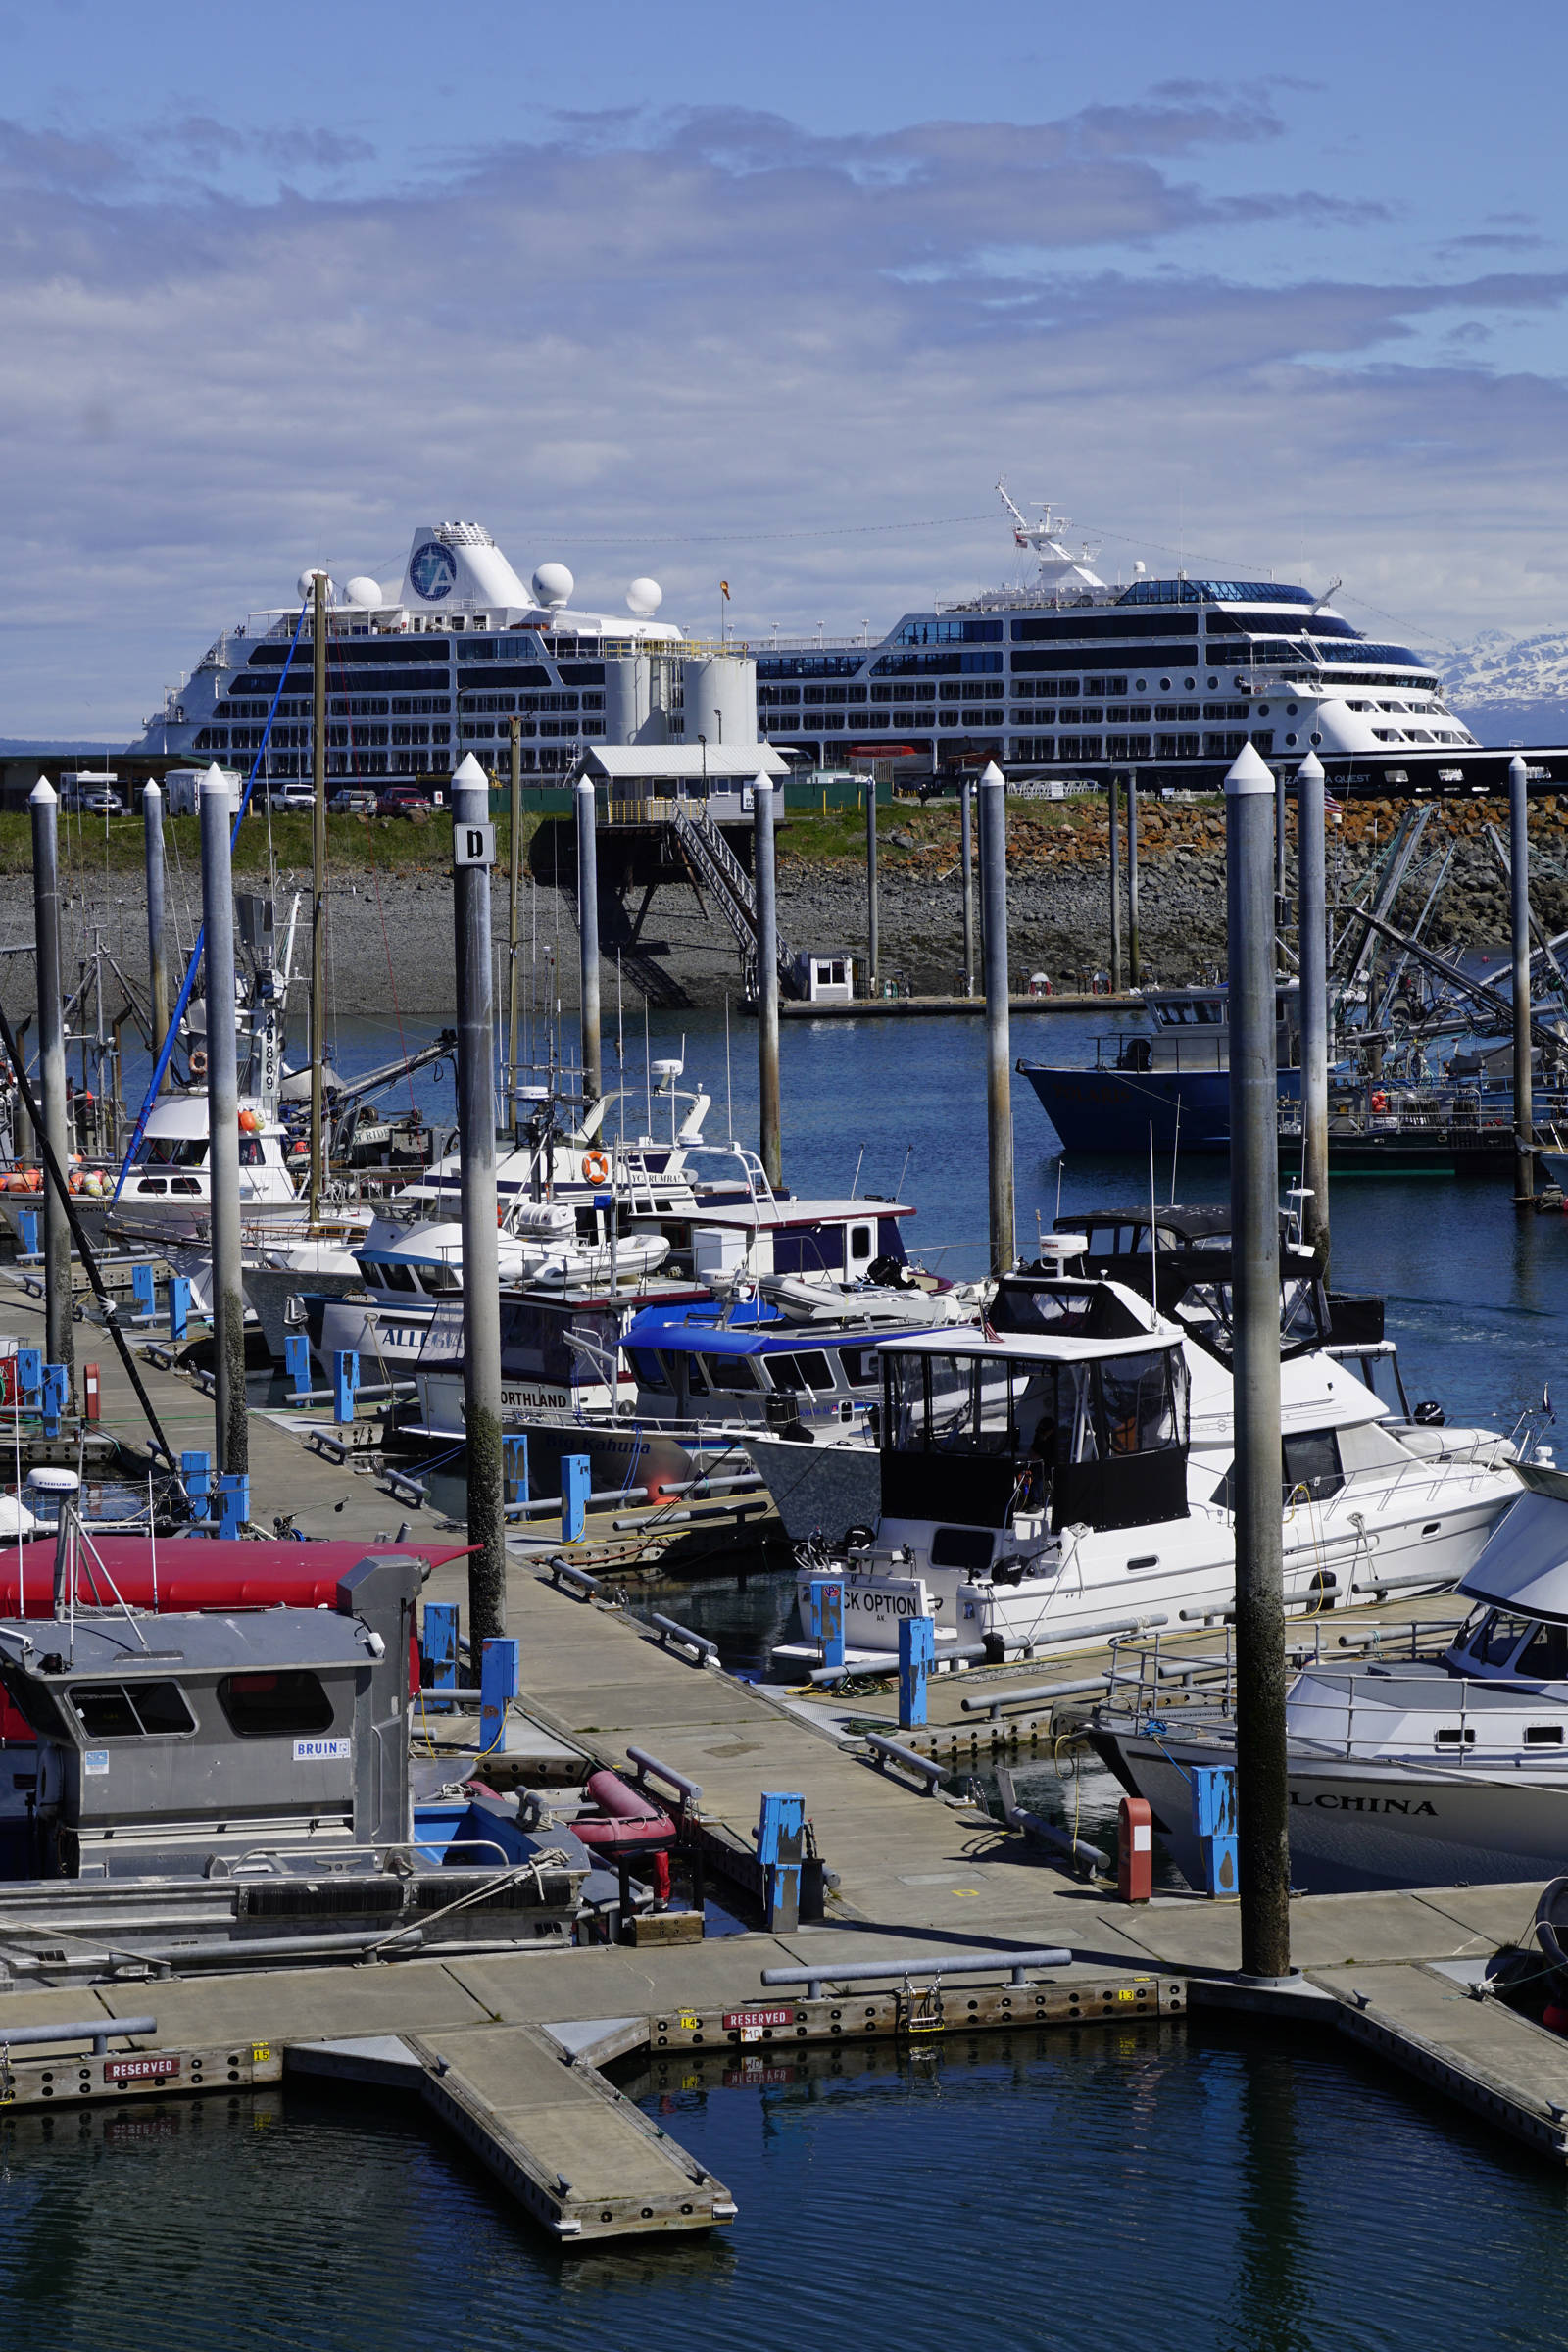 The Azmara Quest looms over the Homer Harbor on Friday, May 24, 2019, in Homer, Alaska. The ship was one of two cruise ships to dock in Homer over the Memorial Day weekend, with the Silver Muse visiting on Sunday, May 26. A planned visit by the USS John Finn on May 27 had to be canceled when the Arleigh-Burke class destroyer was diverted for operational reasons. (Photo by Michael Armstrong/Homer News)